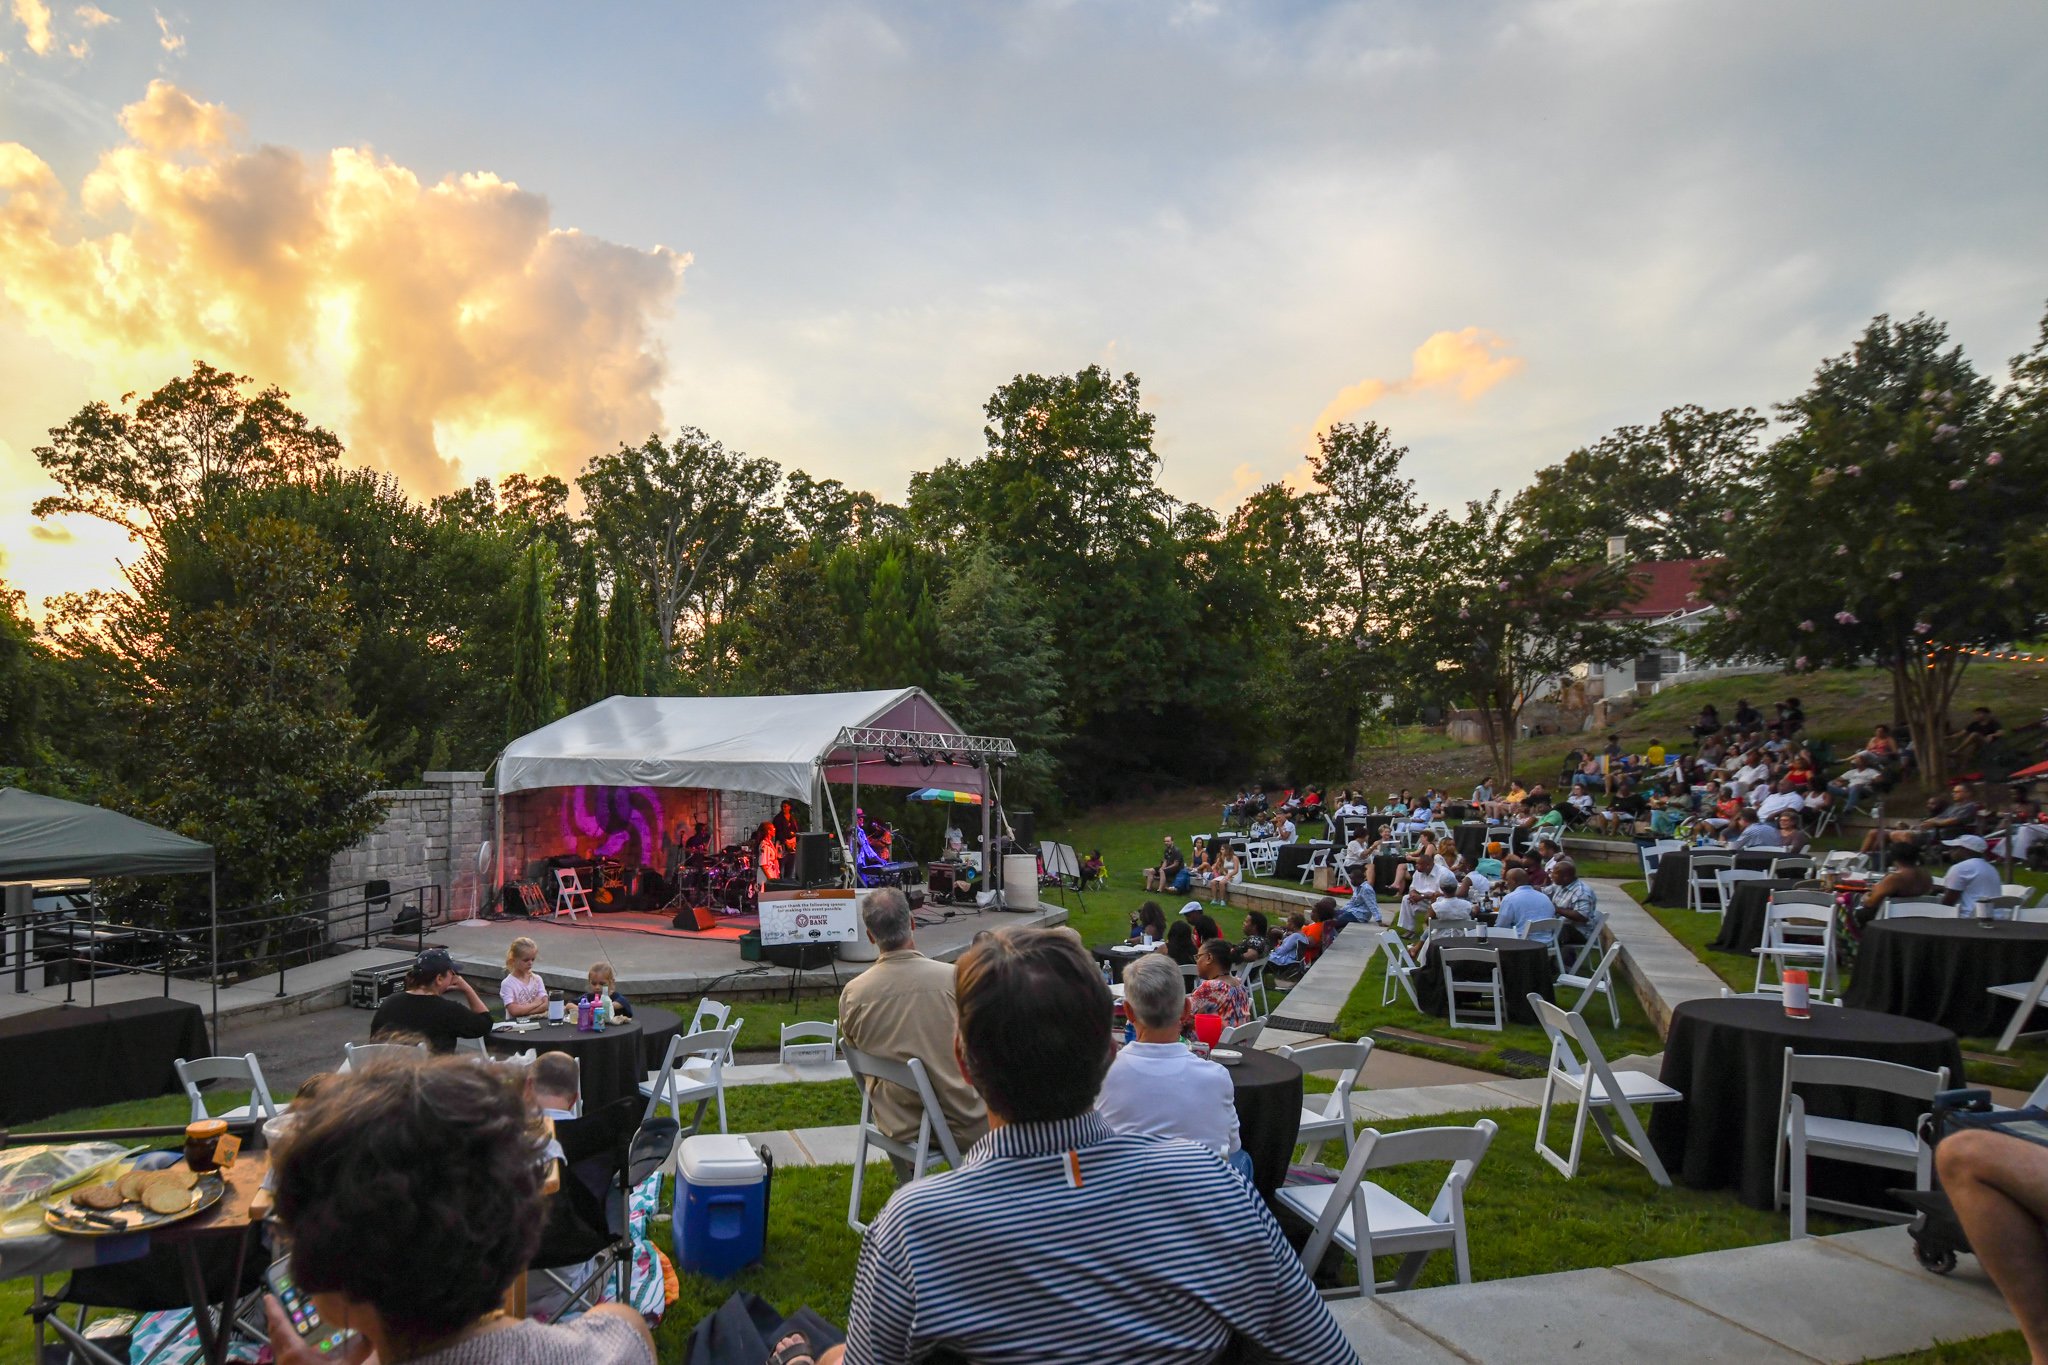 Callanwolde's Jazz on the Lawn outdoor concert series kicks off August 23 and features artists including Joe Gransden, Francine Reed and Bob Baldwin.  Contributed by Callanwolde Center for Fine Arts